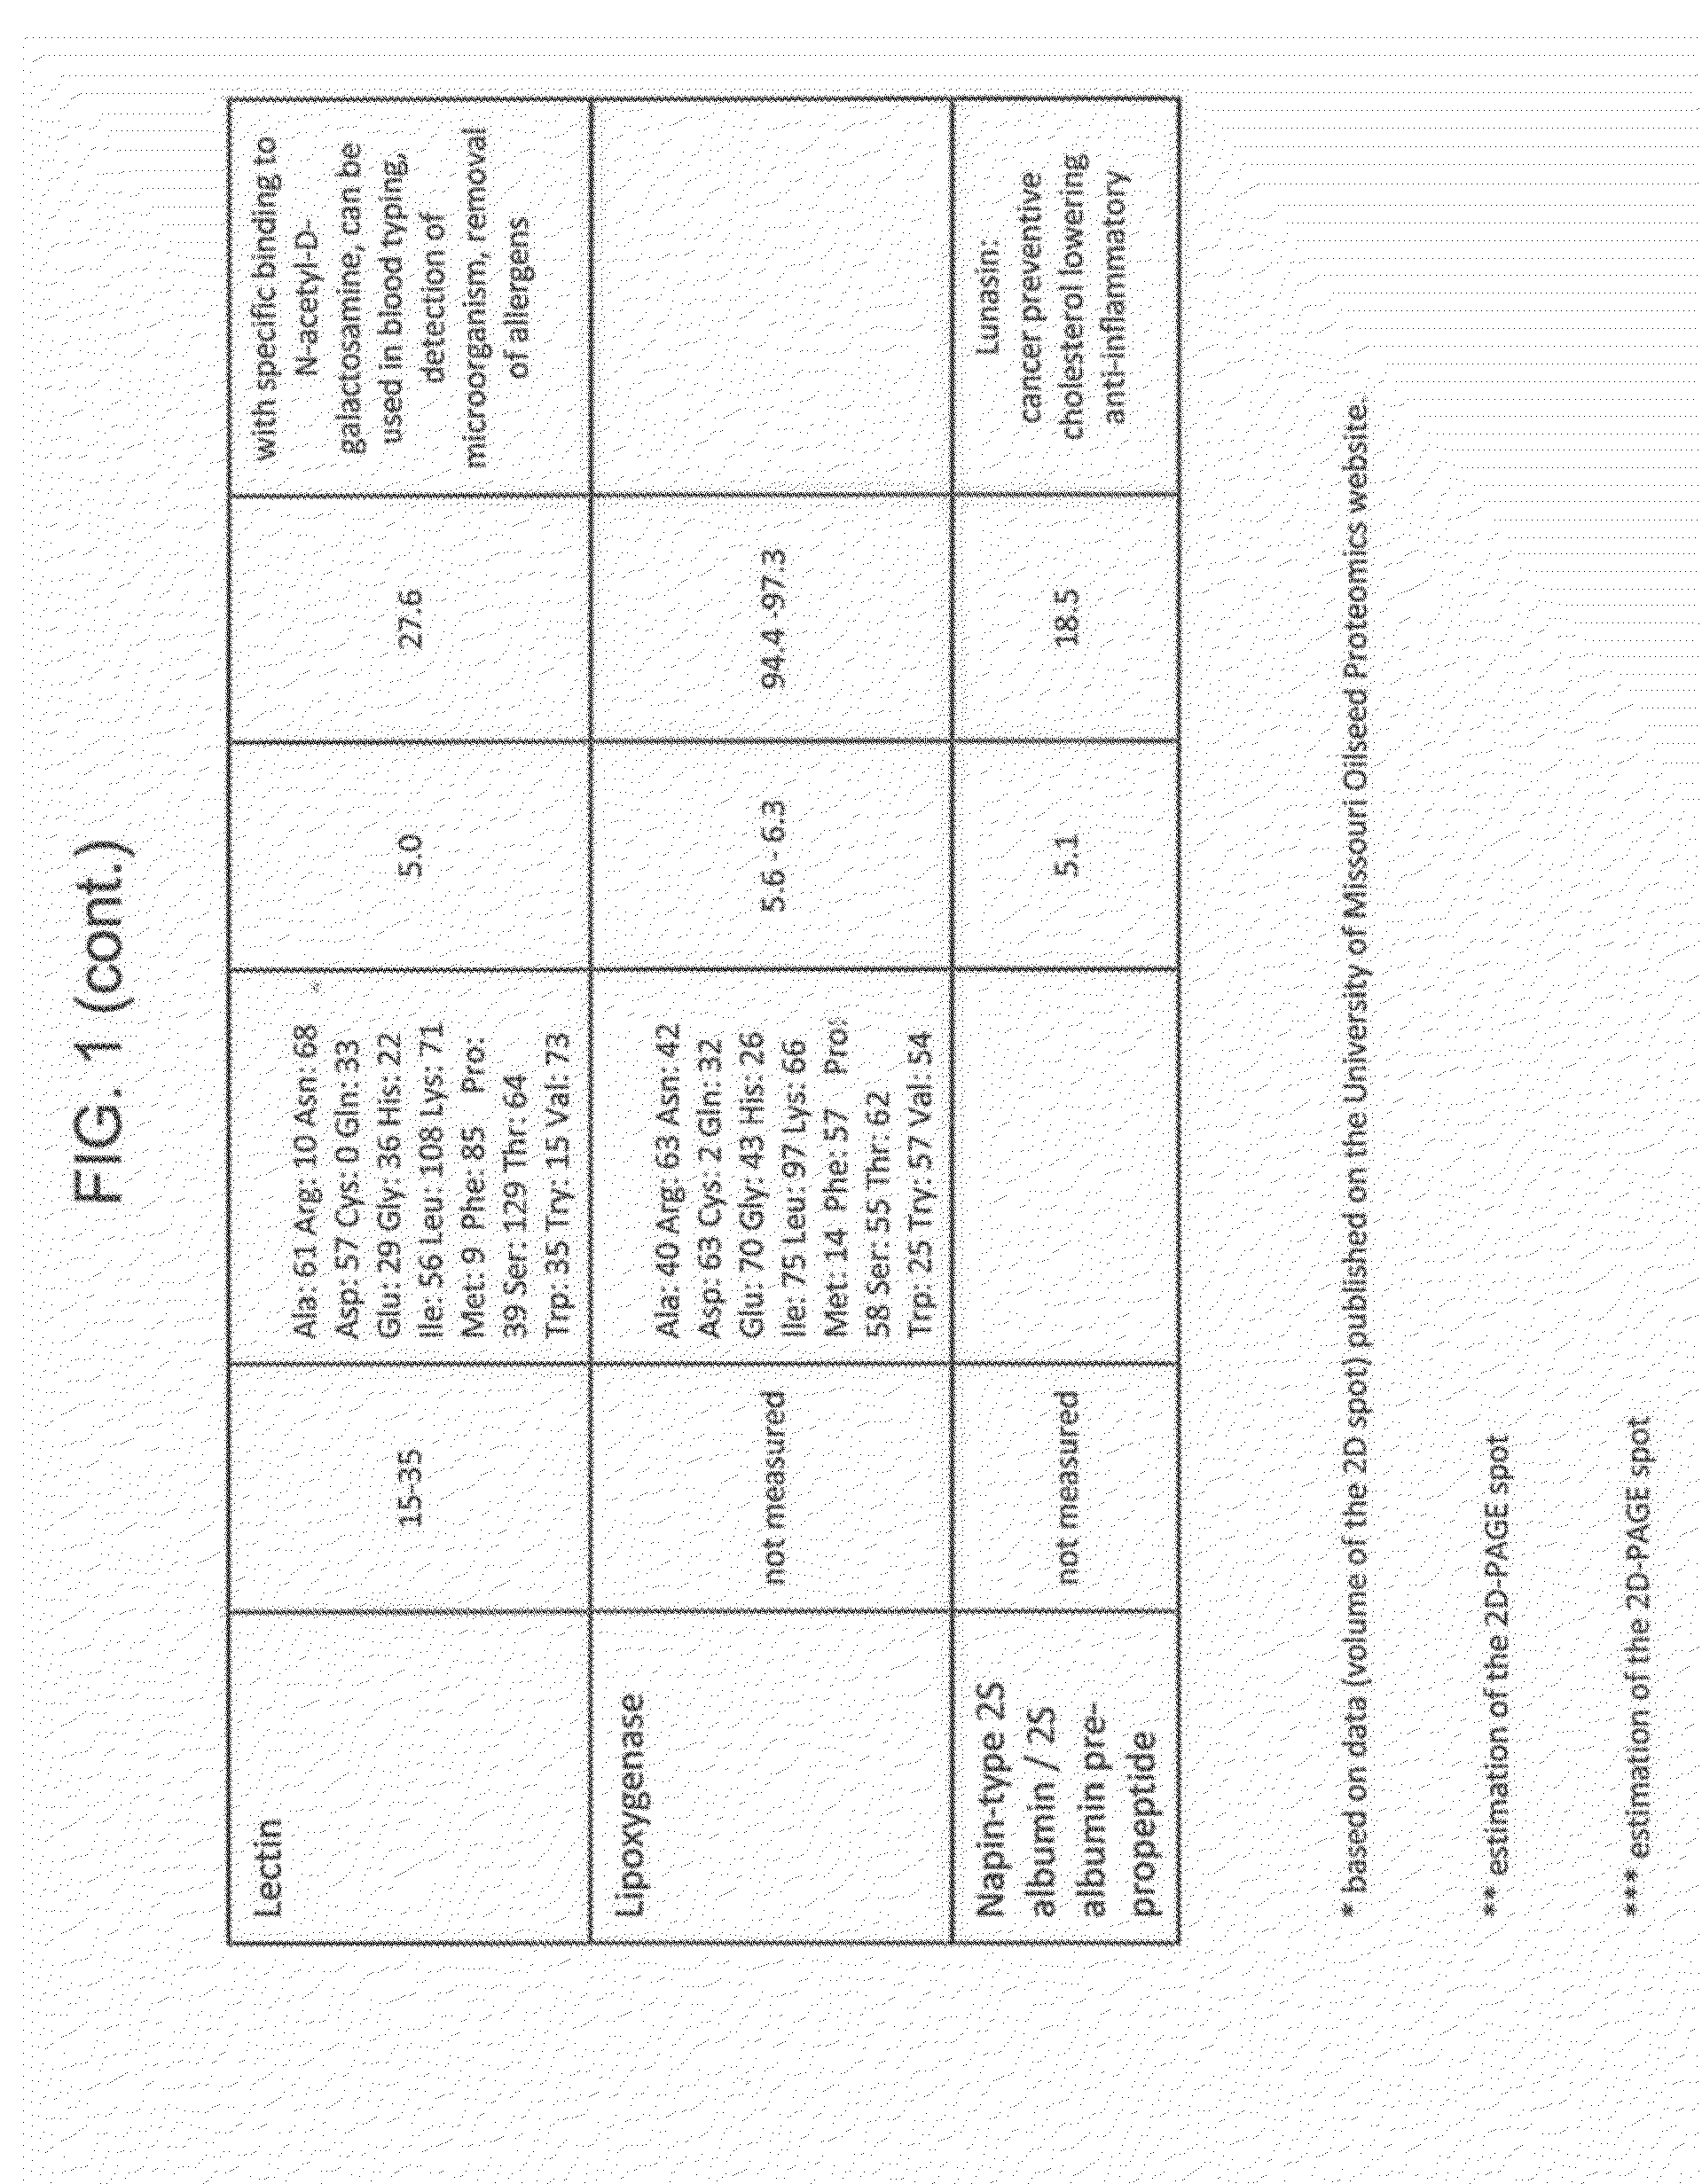 Dessert compositions comprising soy whey proteins that have been isolated from processing streams